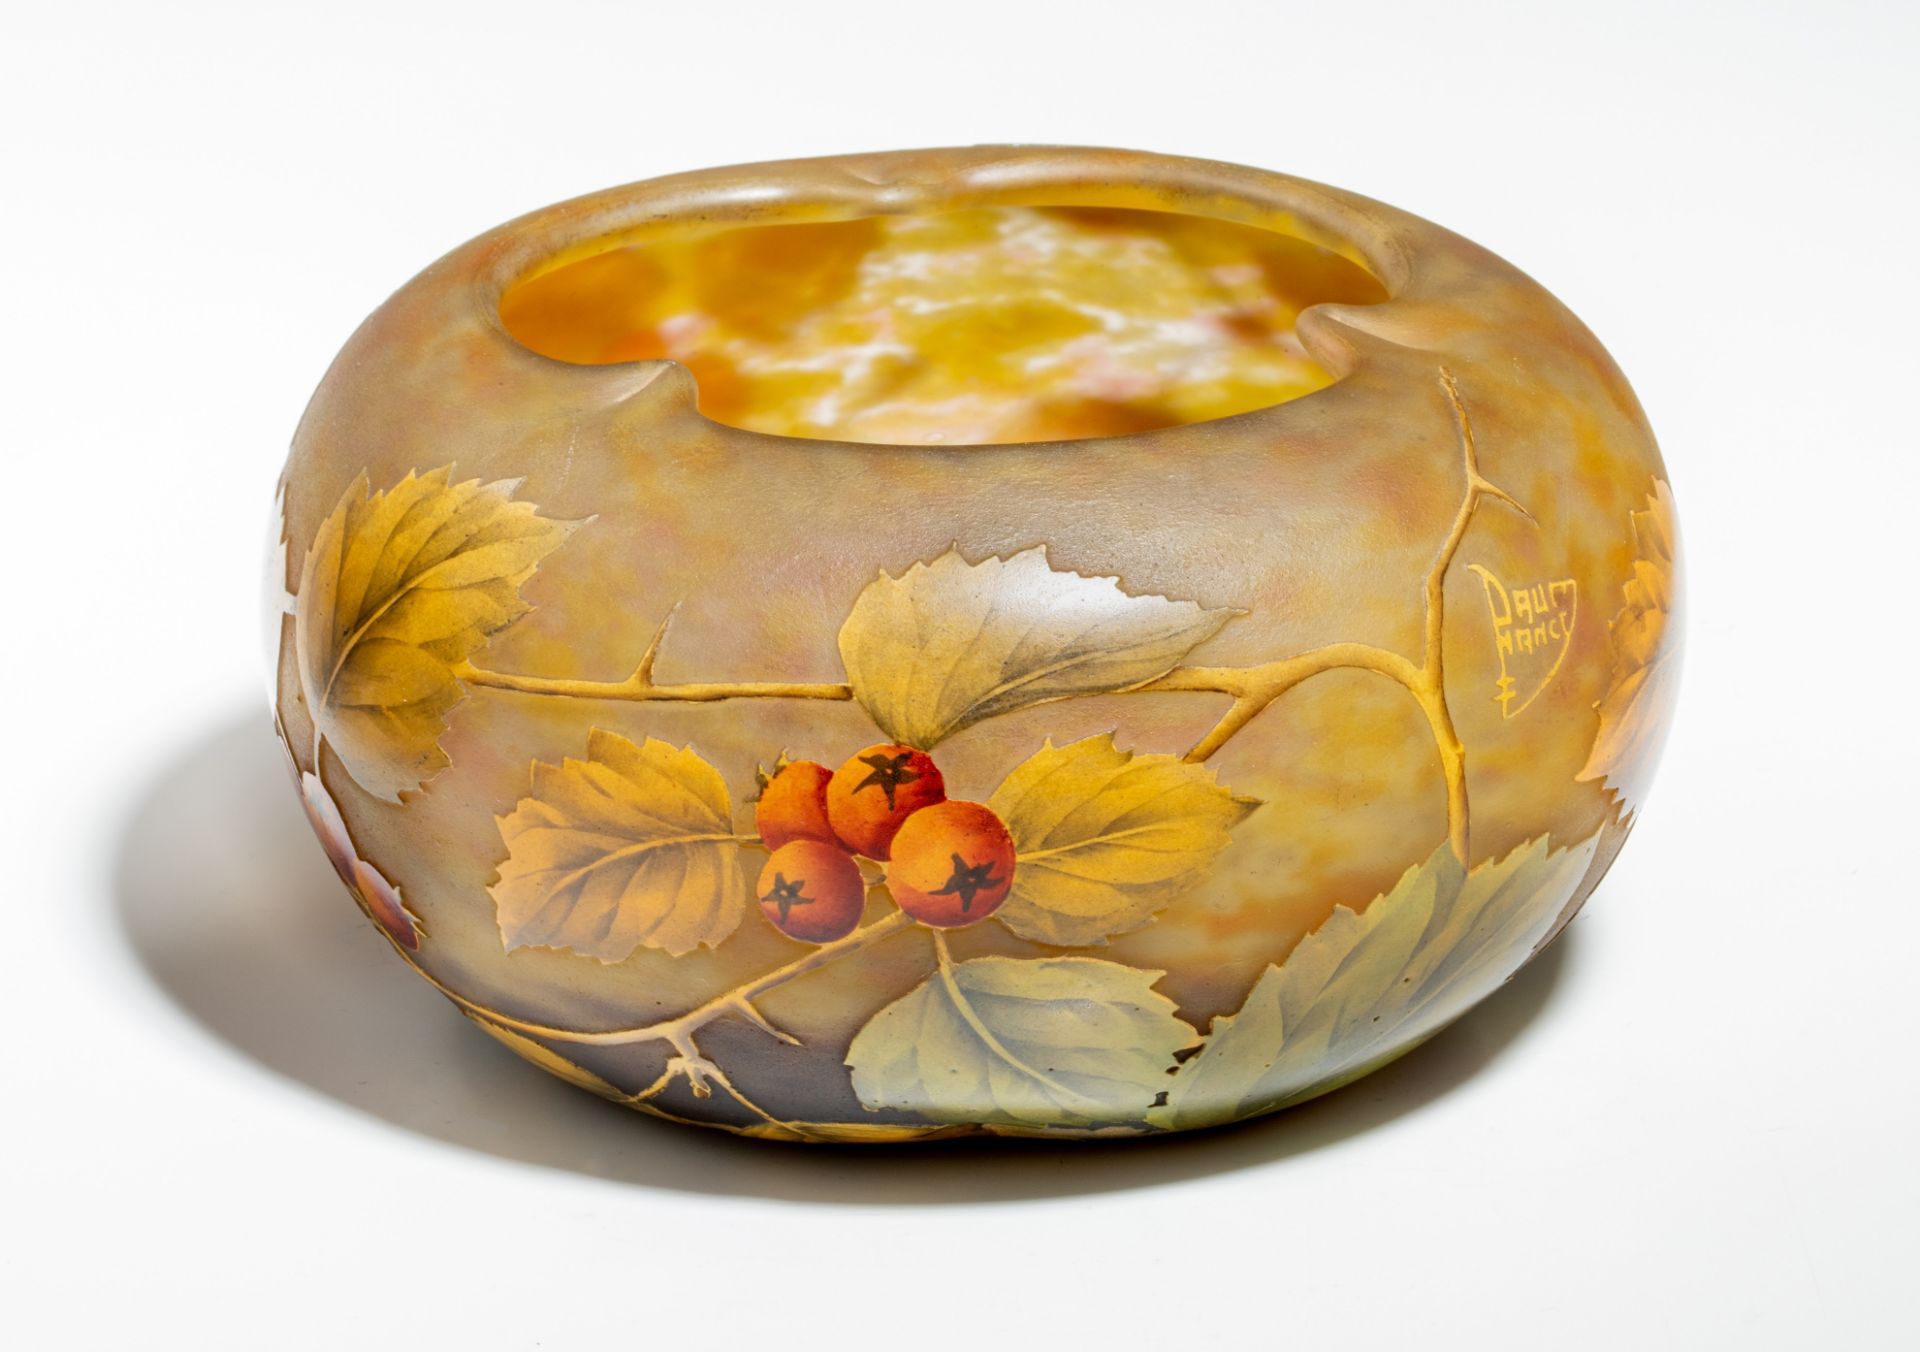 (BIDDING ONLY ON CARLOBONTE.BE) A large Art Nouveau style cameo glass paste bowl with floral decorat - Image 10 of 10